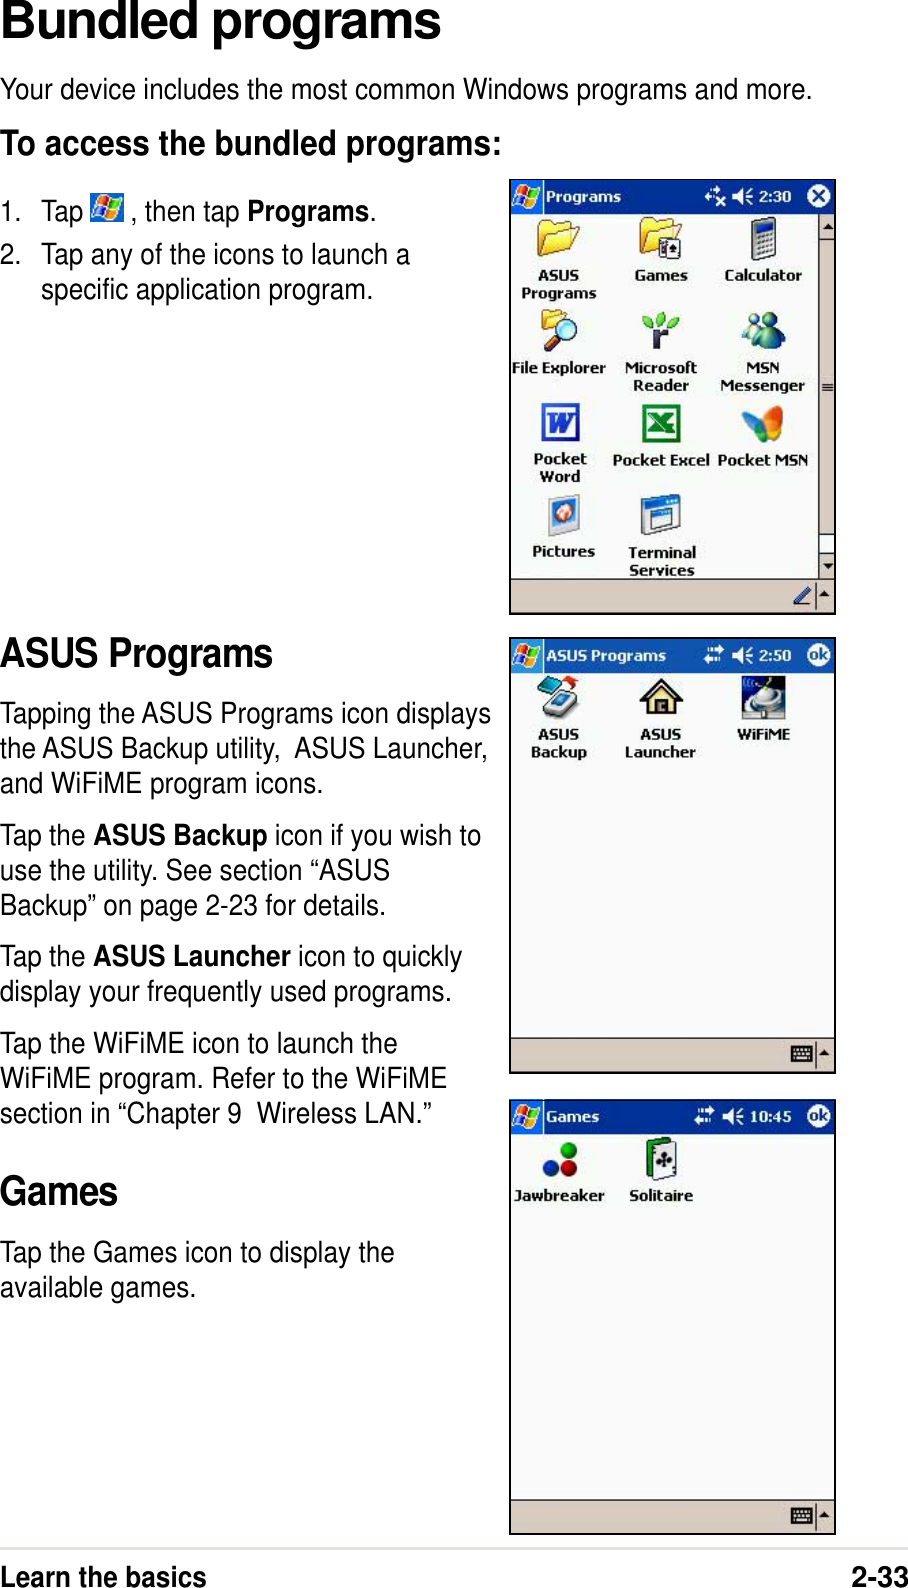 Learn the basics2-33Bundled programsYour device includes the most common Windows programs and more.To access the bundled programs:1. Tap   , then tap Programs.2. Tap any of the icons to launch aspecific application program.ASUS ProgramsTapping the ASUS Programs icon displaysthe ASUS Backup utility,  ASUS Launcher,and WiFiME program icons.Tap the ASUS Backup icon if you wish touse the utility. See section “ASUSBackup” on page 2-23 for details.Tap the ASUS Launcher icon to quicklydisplay your frequently used programs.Tap the WiFiME icon to launch theWiFiME program. Refer to the WiFiMEsection in “Chapter 9  Wireless LAN.”GamesTap the Games icon to display theavailable games.